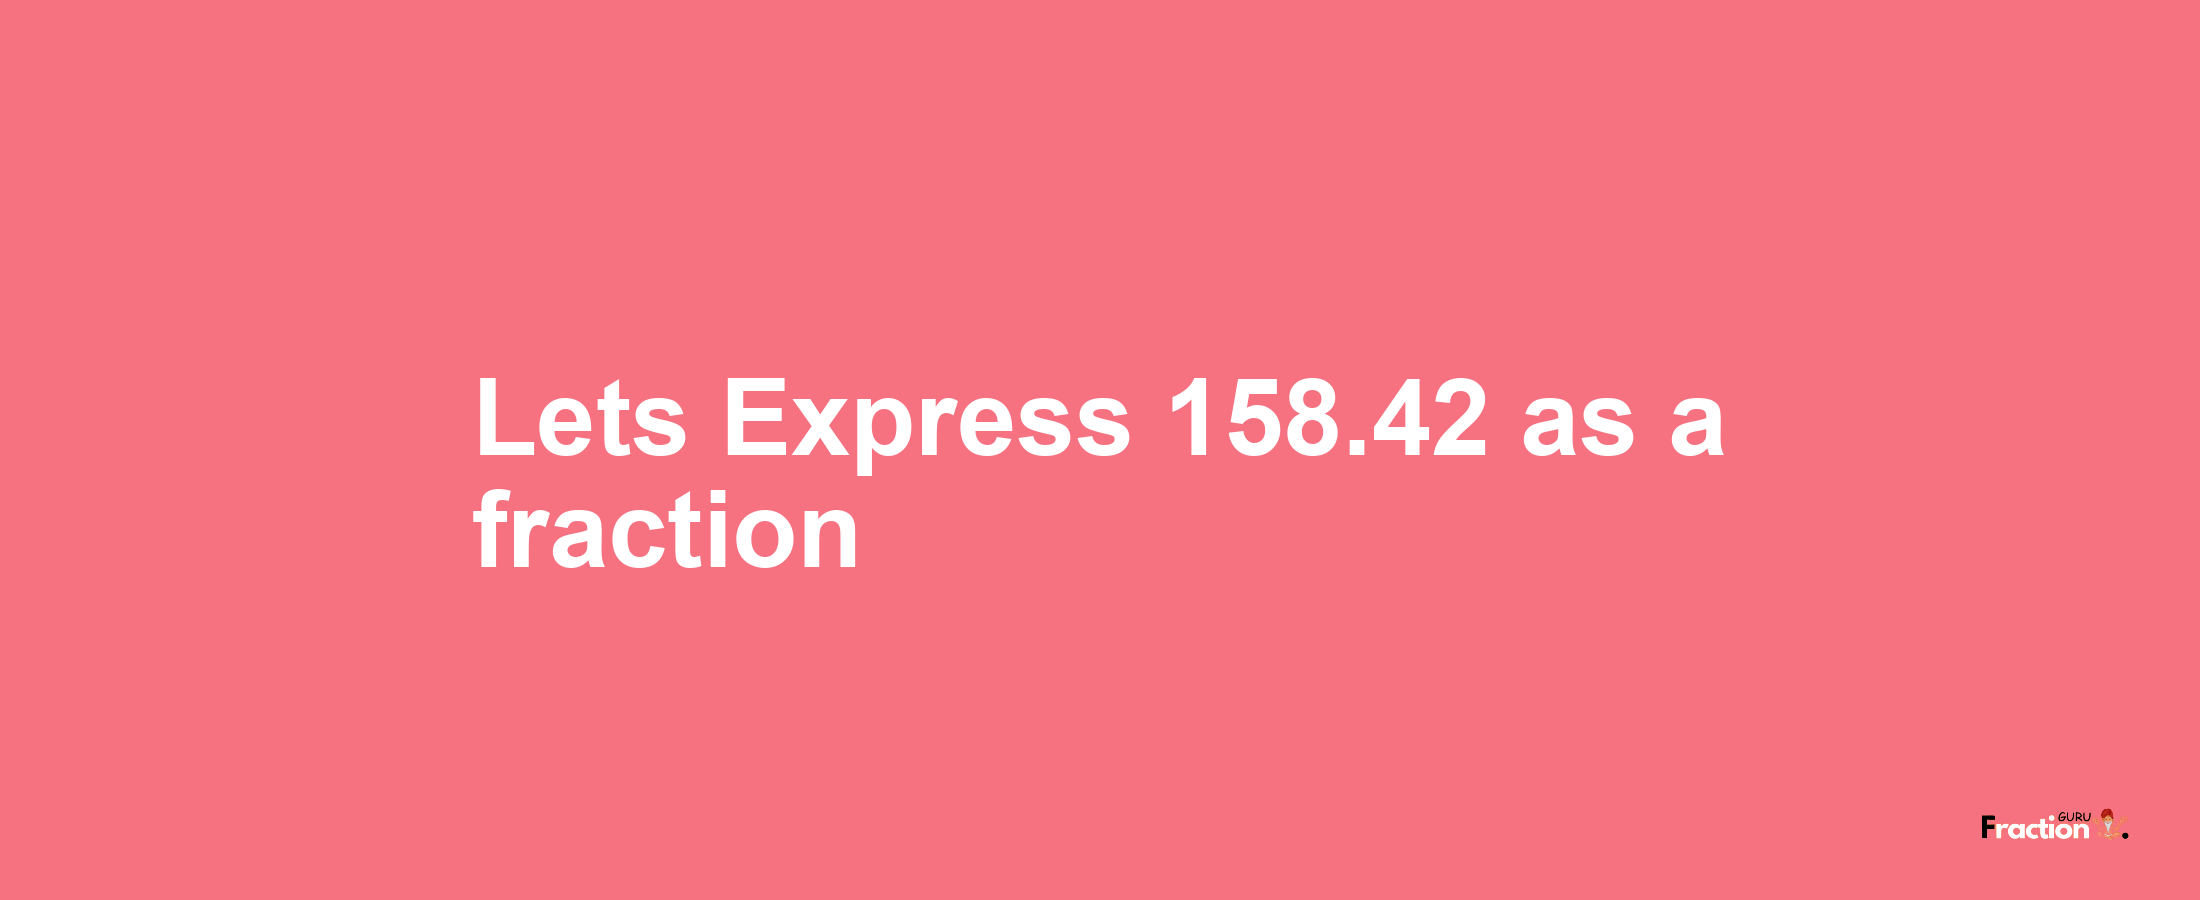 Lets Express 158.42 as afraction